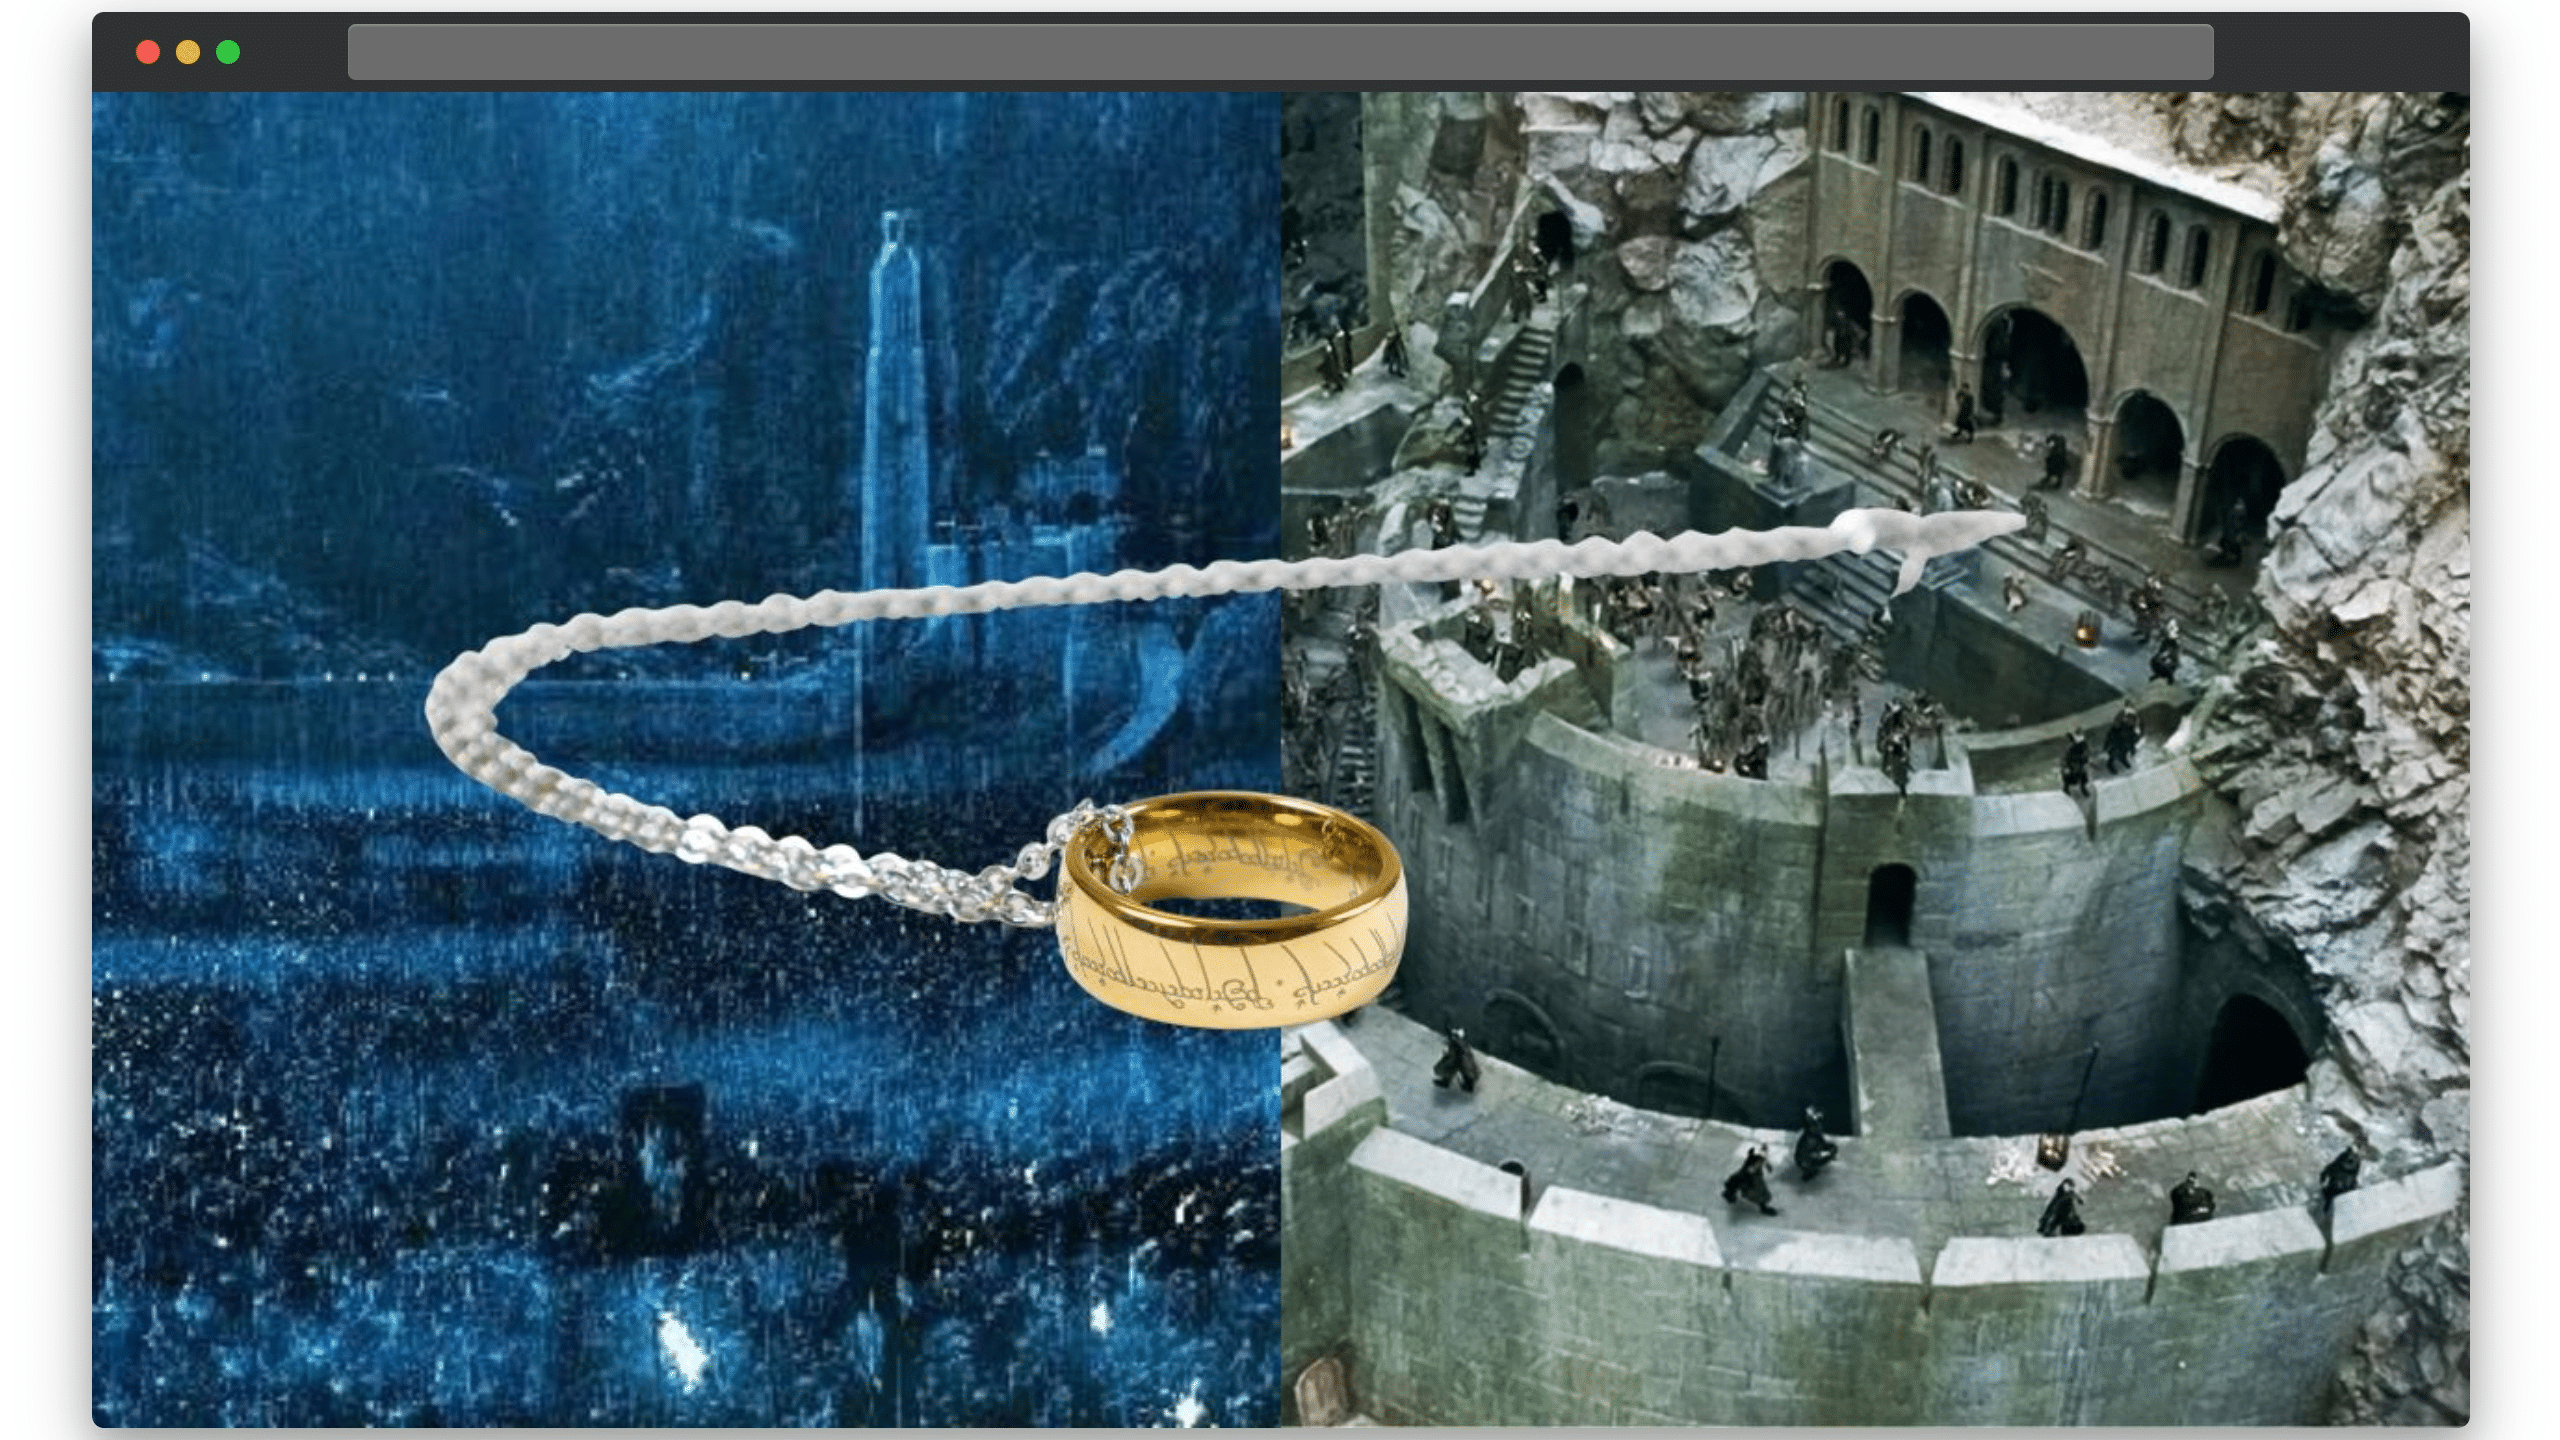 Shots from Lord of The Rings, The Battle of Helm's Deep  